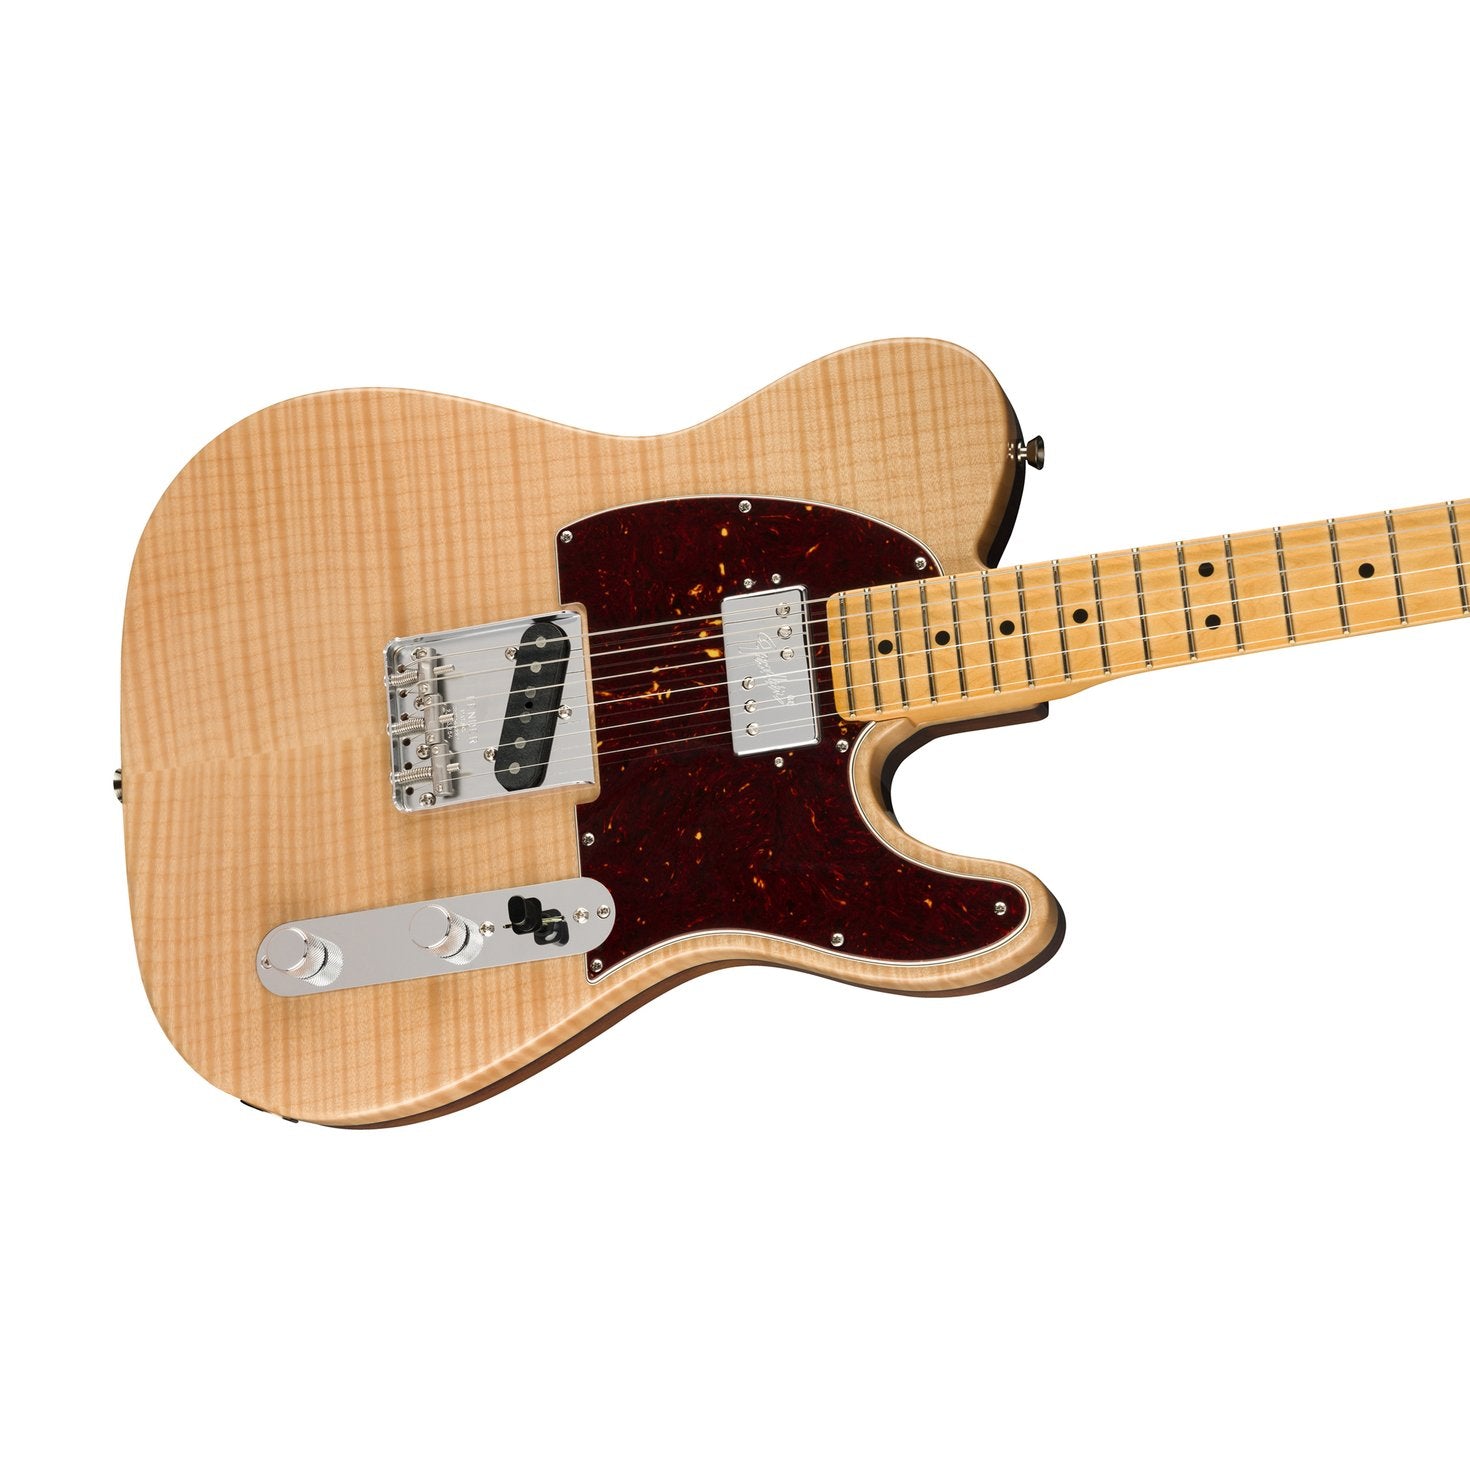 Fender Ltd Ed Rarities Flame Maple Top Chambered Telecaster Telecaster Electric Guitar, Natural, FENDER, ELECTRIC GUITAR, fender-electric-guitar-f03-017-6505-821, ZOSO MUSIC SDN BHD